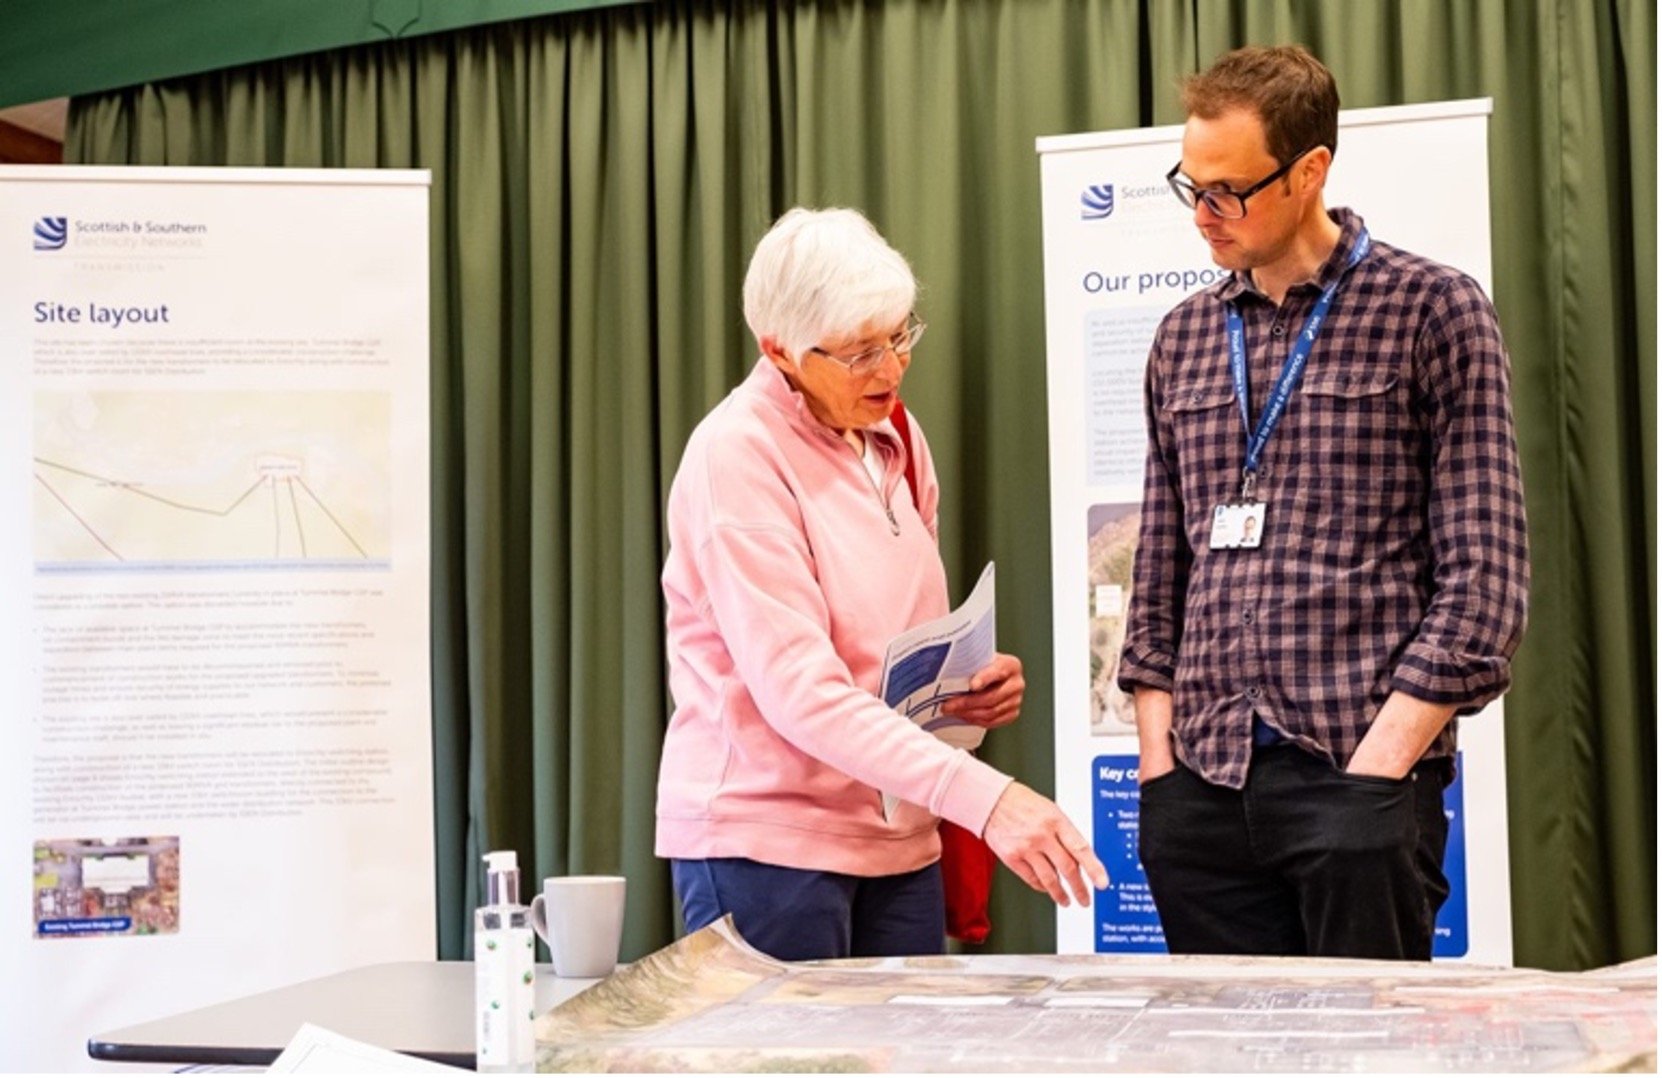 An SSEN Transmission employee and a member of the public examining maps on a table. Project posters are visible behind them.